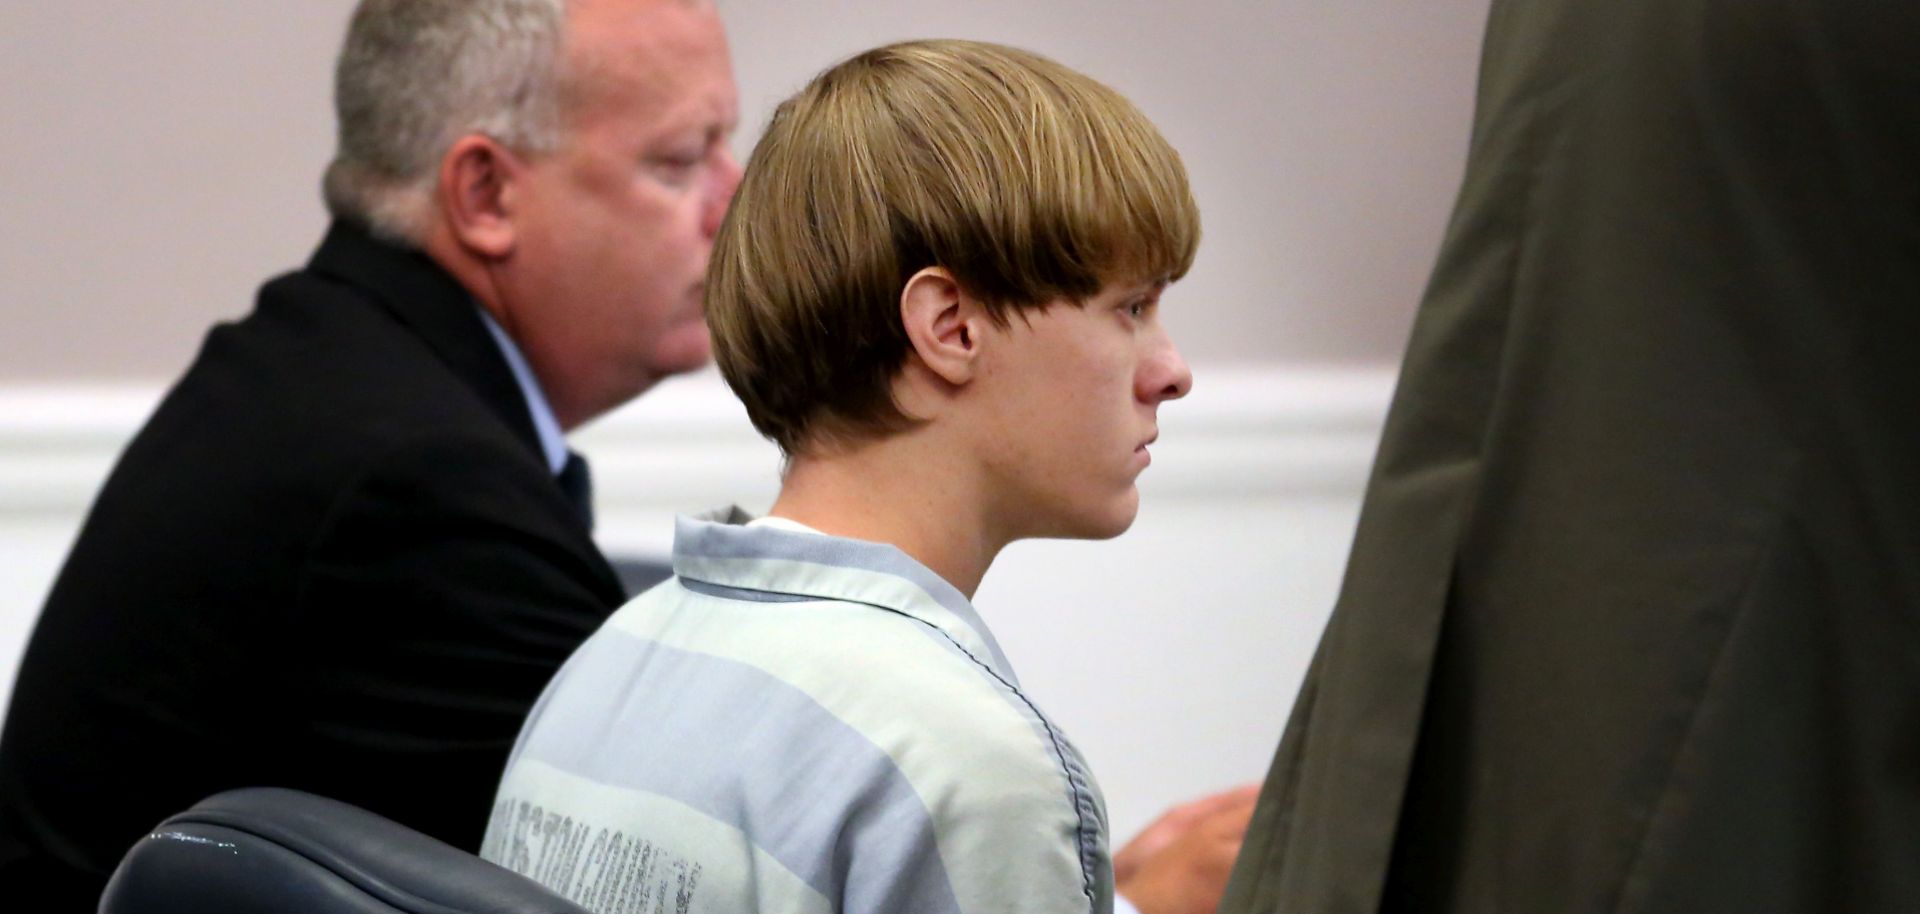 Dylann Roof, the suspect behind the church shooting that left nine dead in the U.S. state of South Carolina, appears in court the day after the attack on July 15, 2015. 